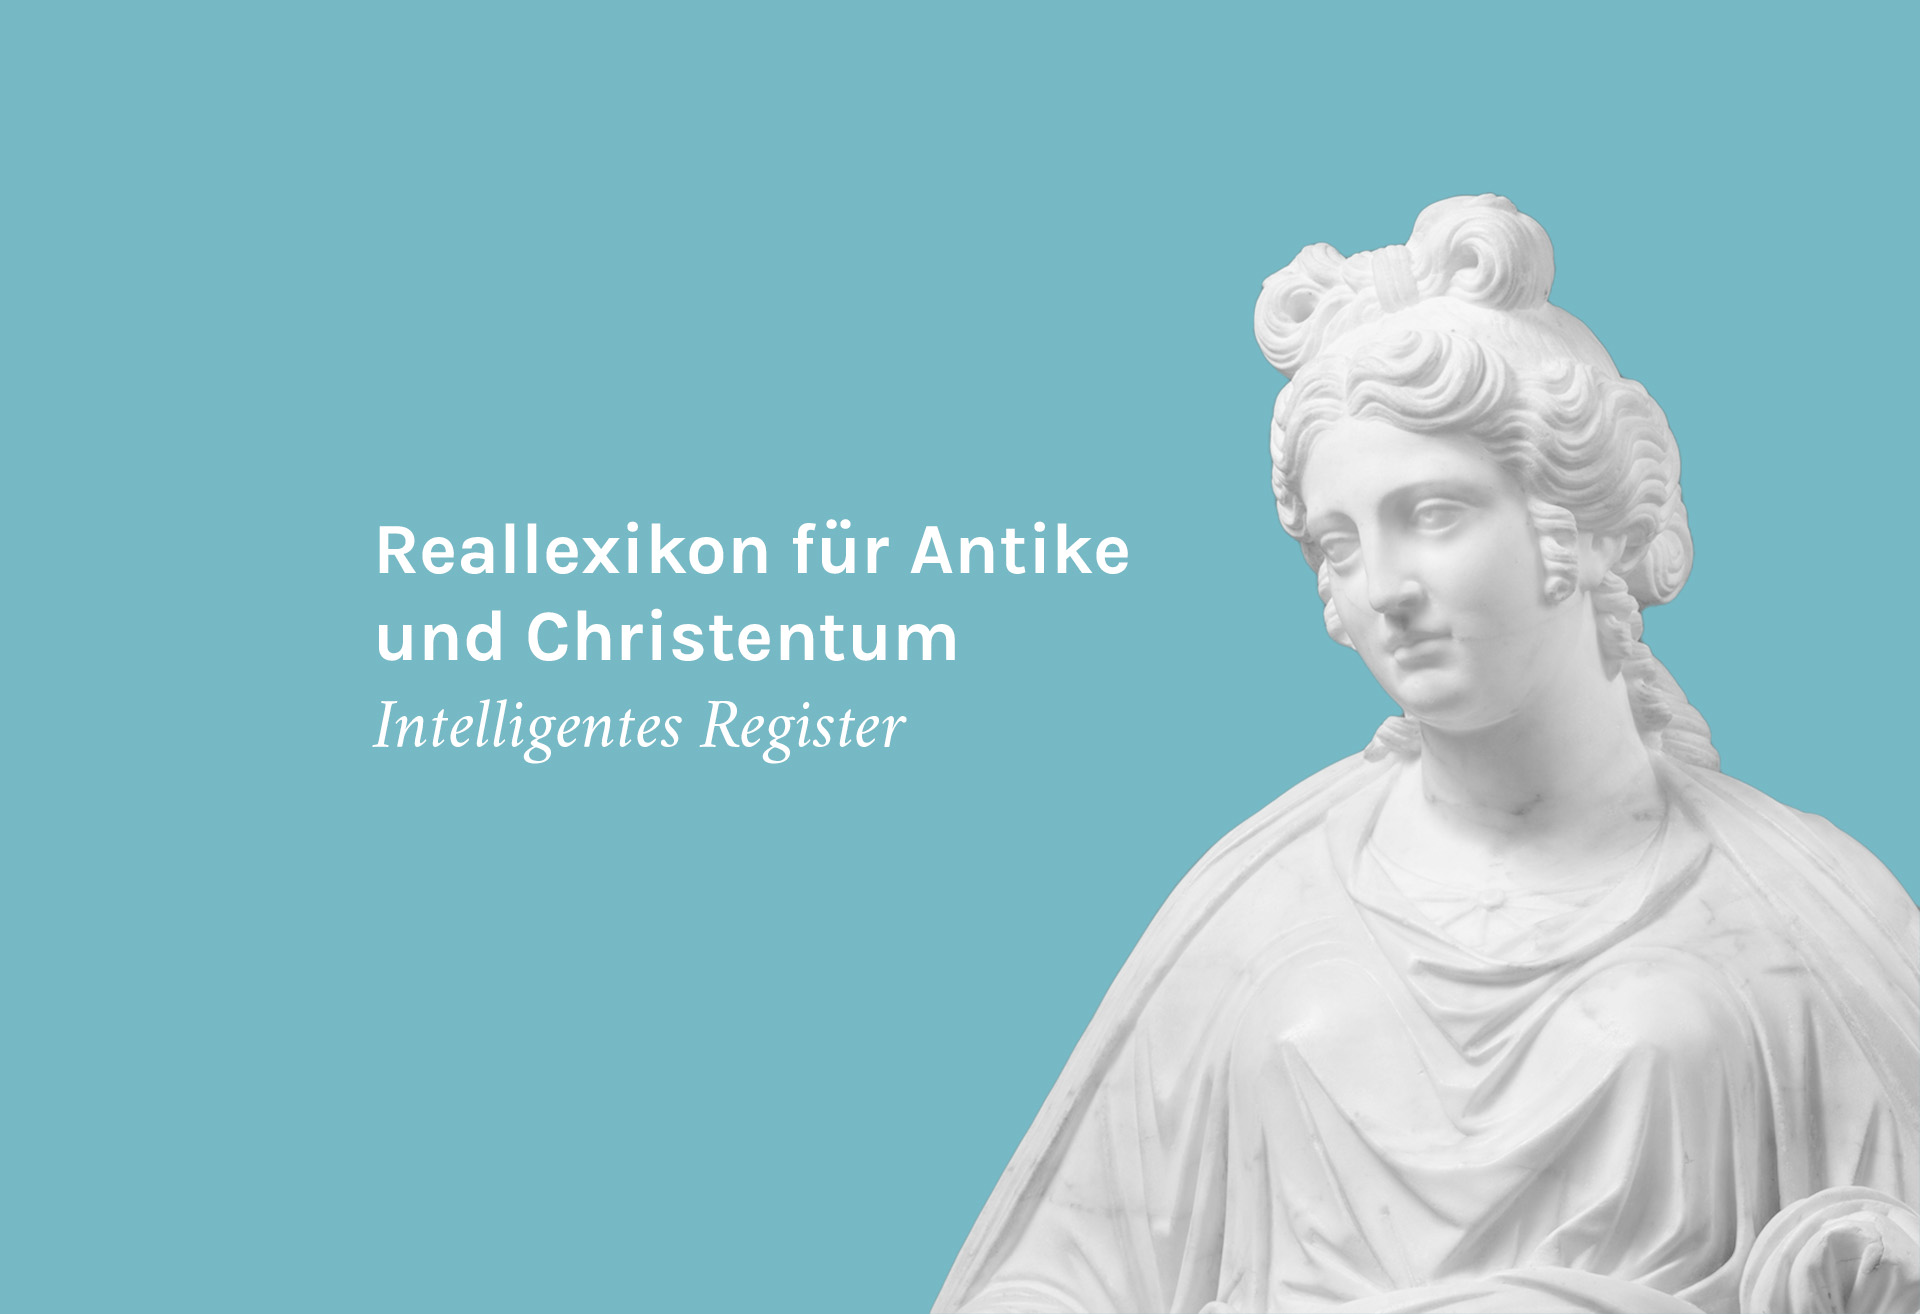 light blue background color; in the right corner, a white (ancient roman/greek-looking) statue of a woman - Saint Catherine of Alexandria, sculptured by Cristoforo Solari in the 16th century in an antique/classical style; to the left of it, the words "Reallexikon für Antike und Christentum: Intelligentes Register"